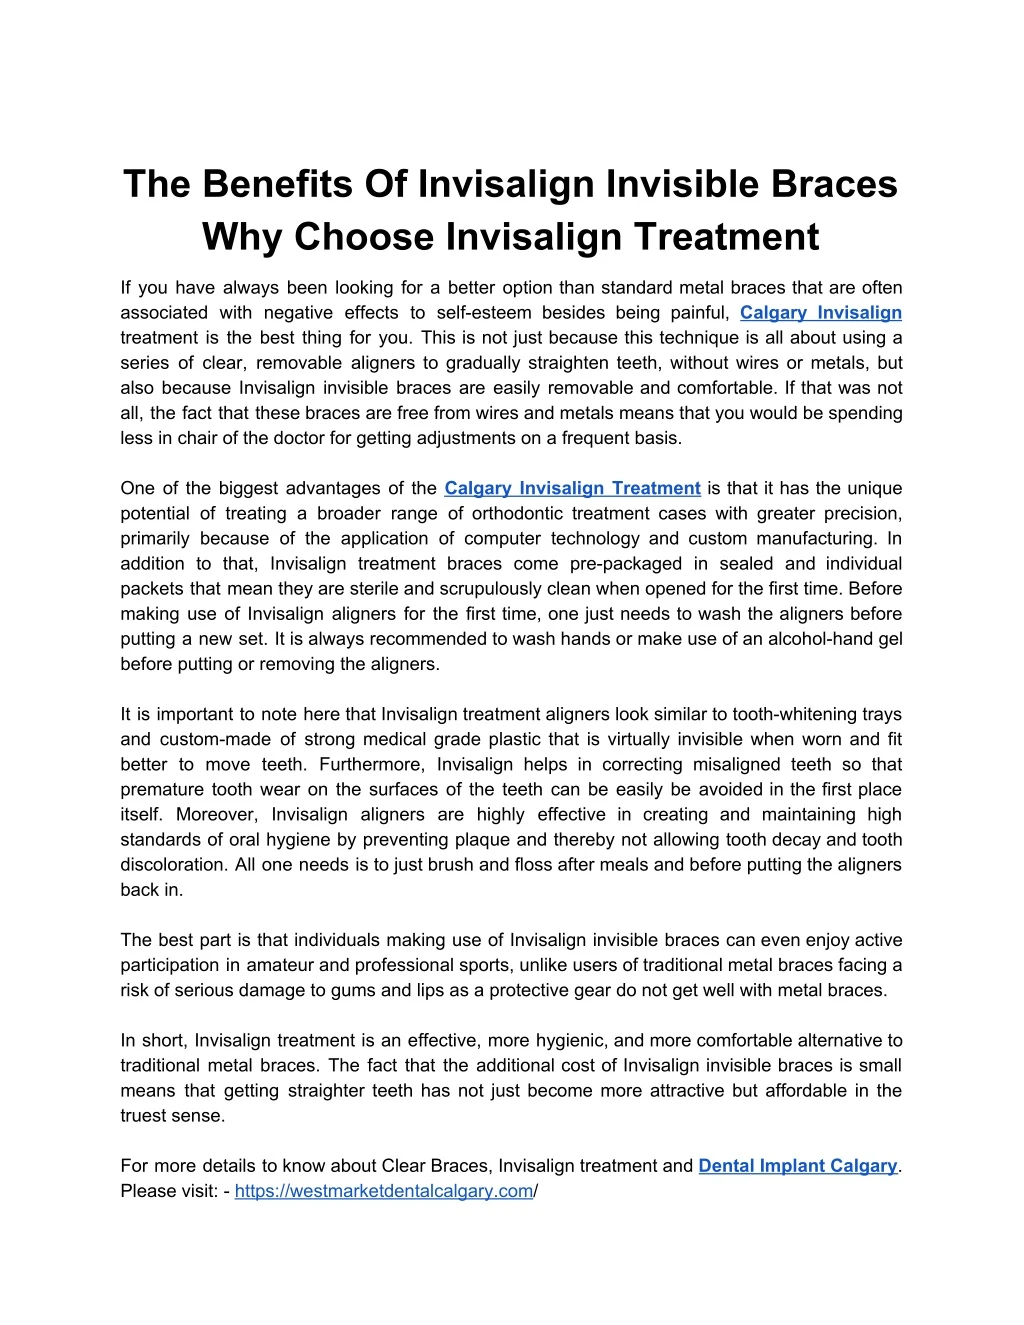 the benefits of invisalign invisible braces